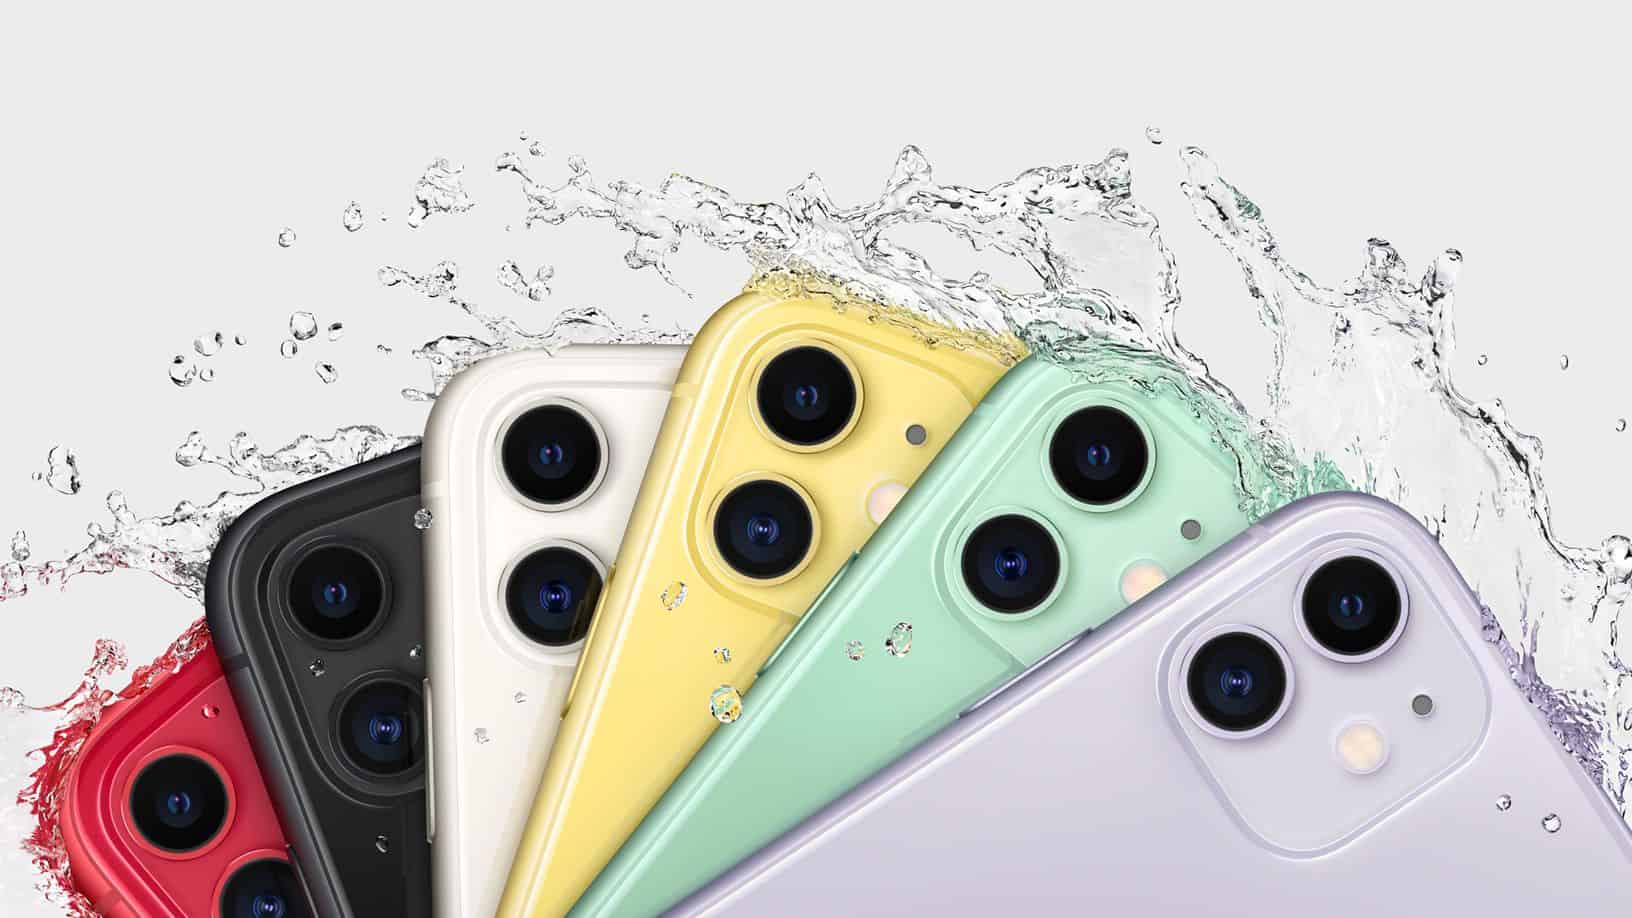 Apple fined €10M over iPhone’s water resistance claims